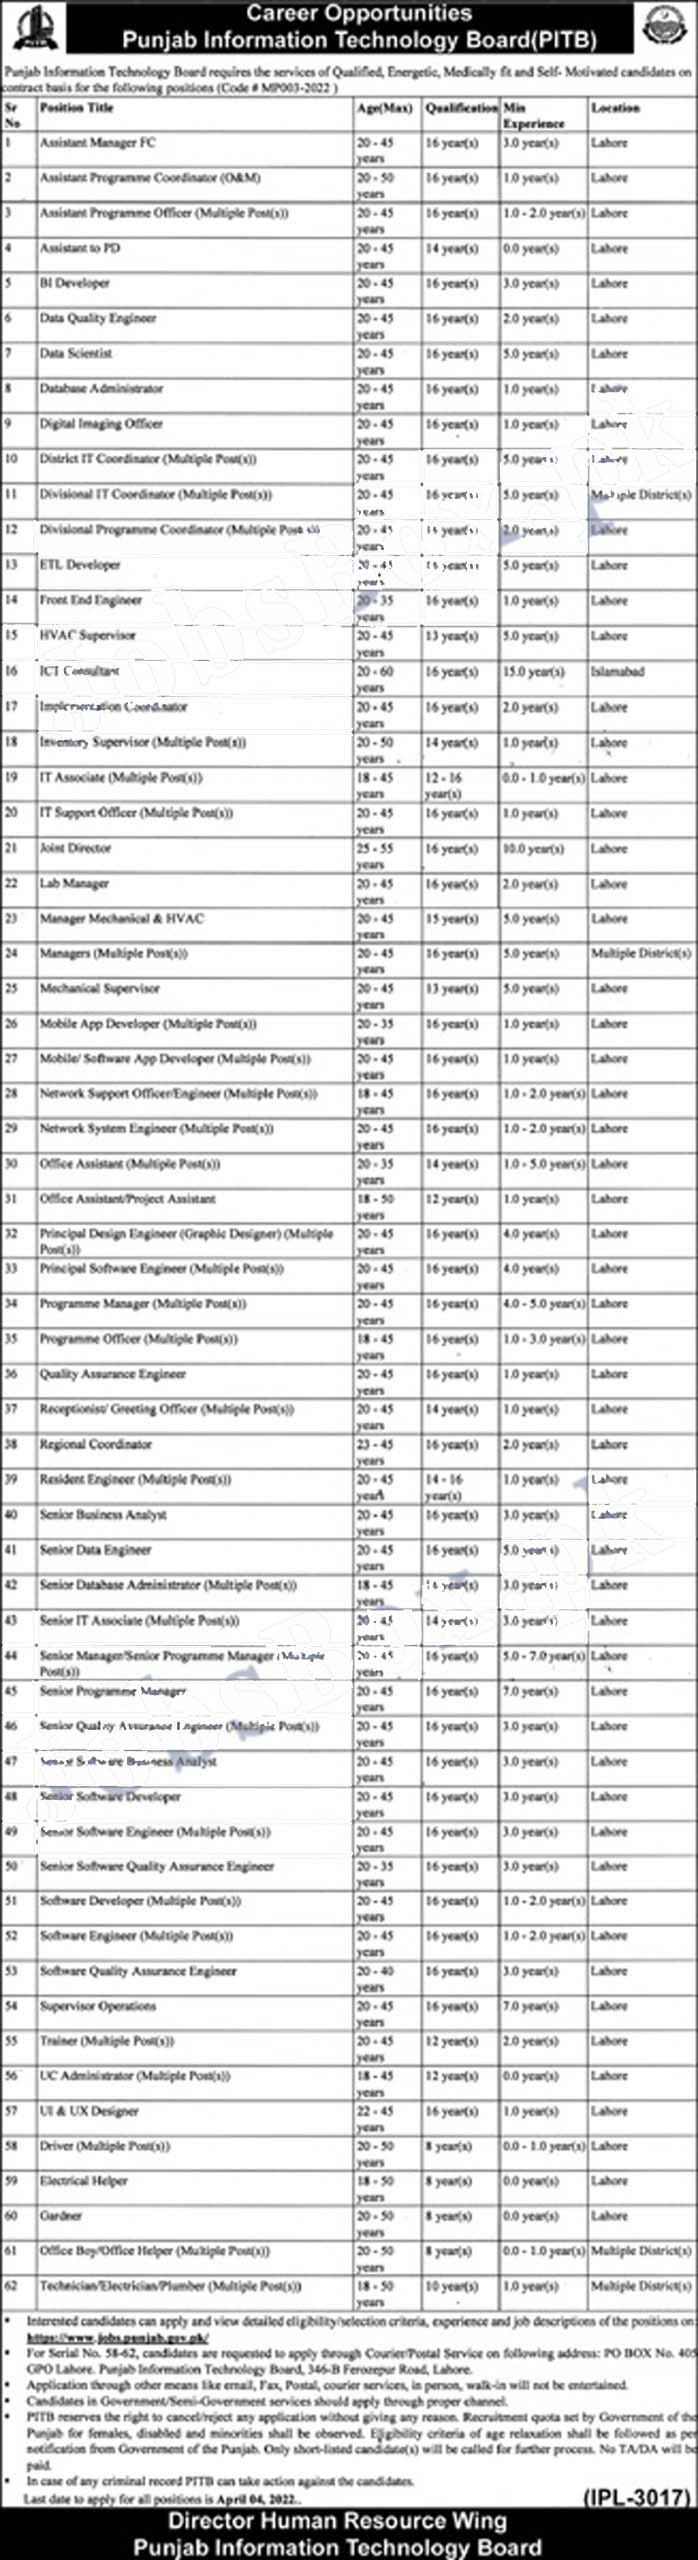 Today Punjab Information Technology Board PITB jobs 2022